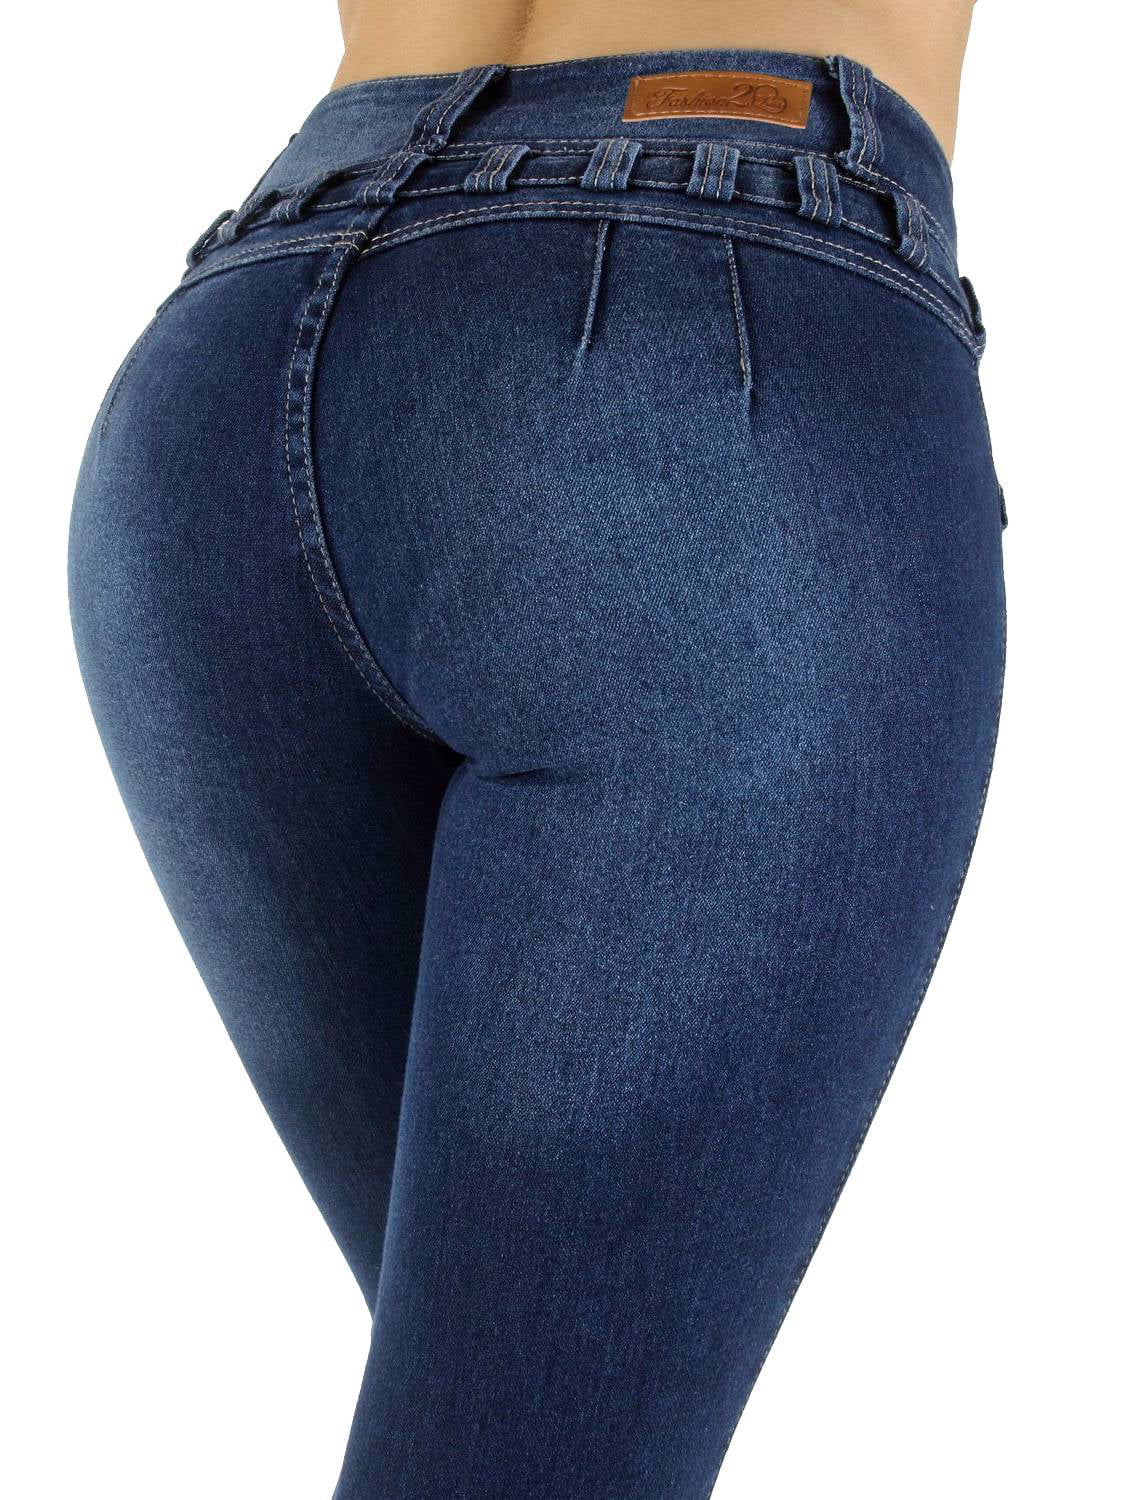 colombian style jeans